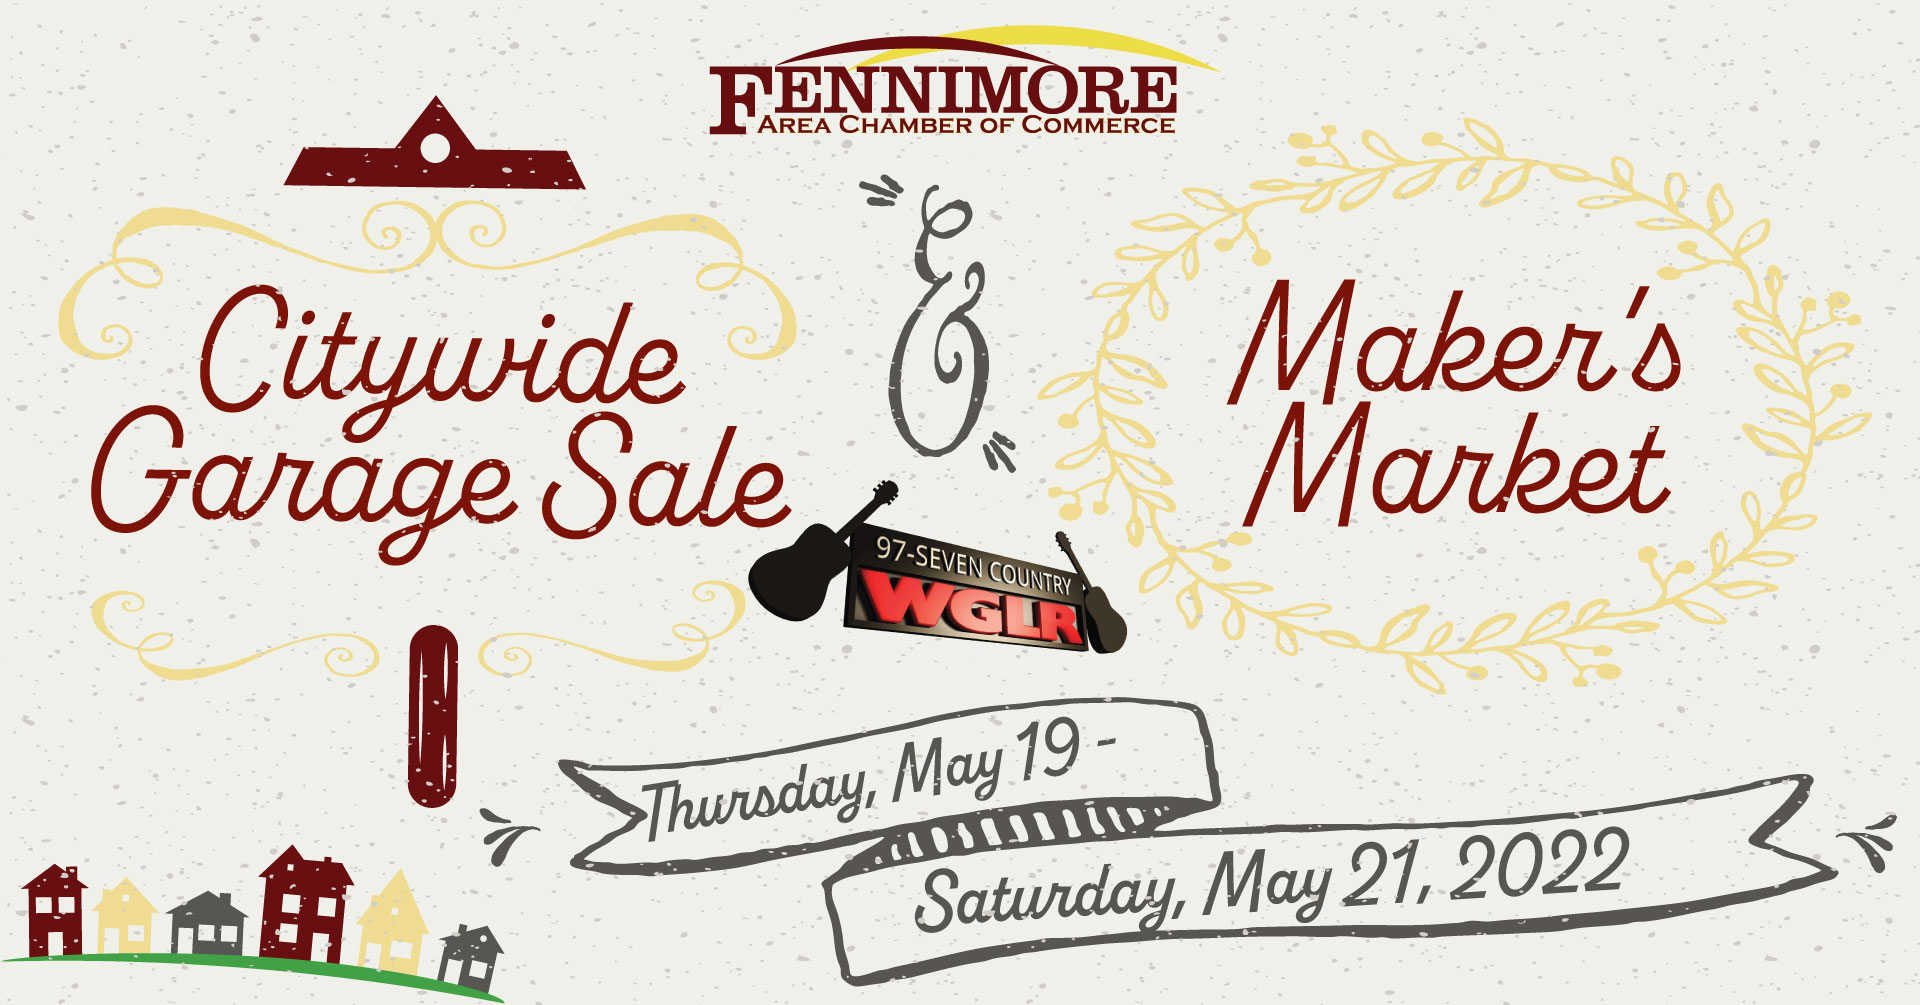 Fennimore-Wisconsin-Citywide-Garage-Sale-and-Makers-Market-in-May-2022-1